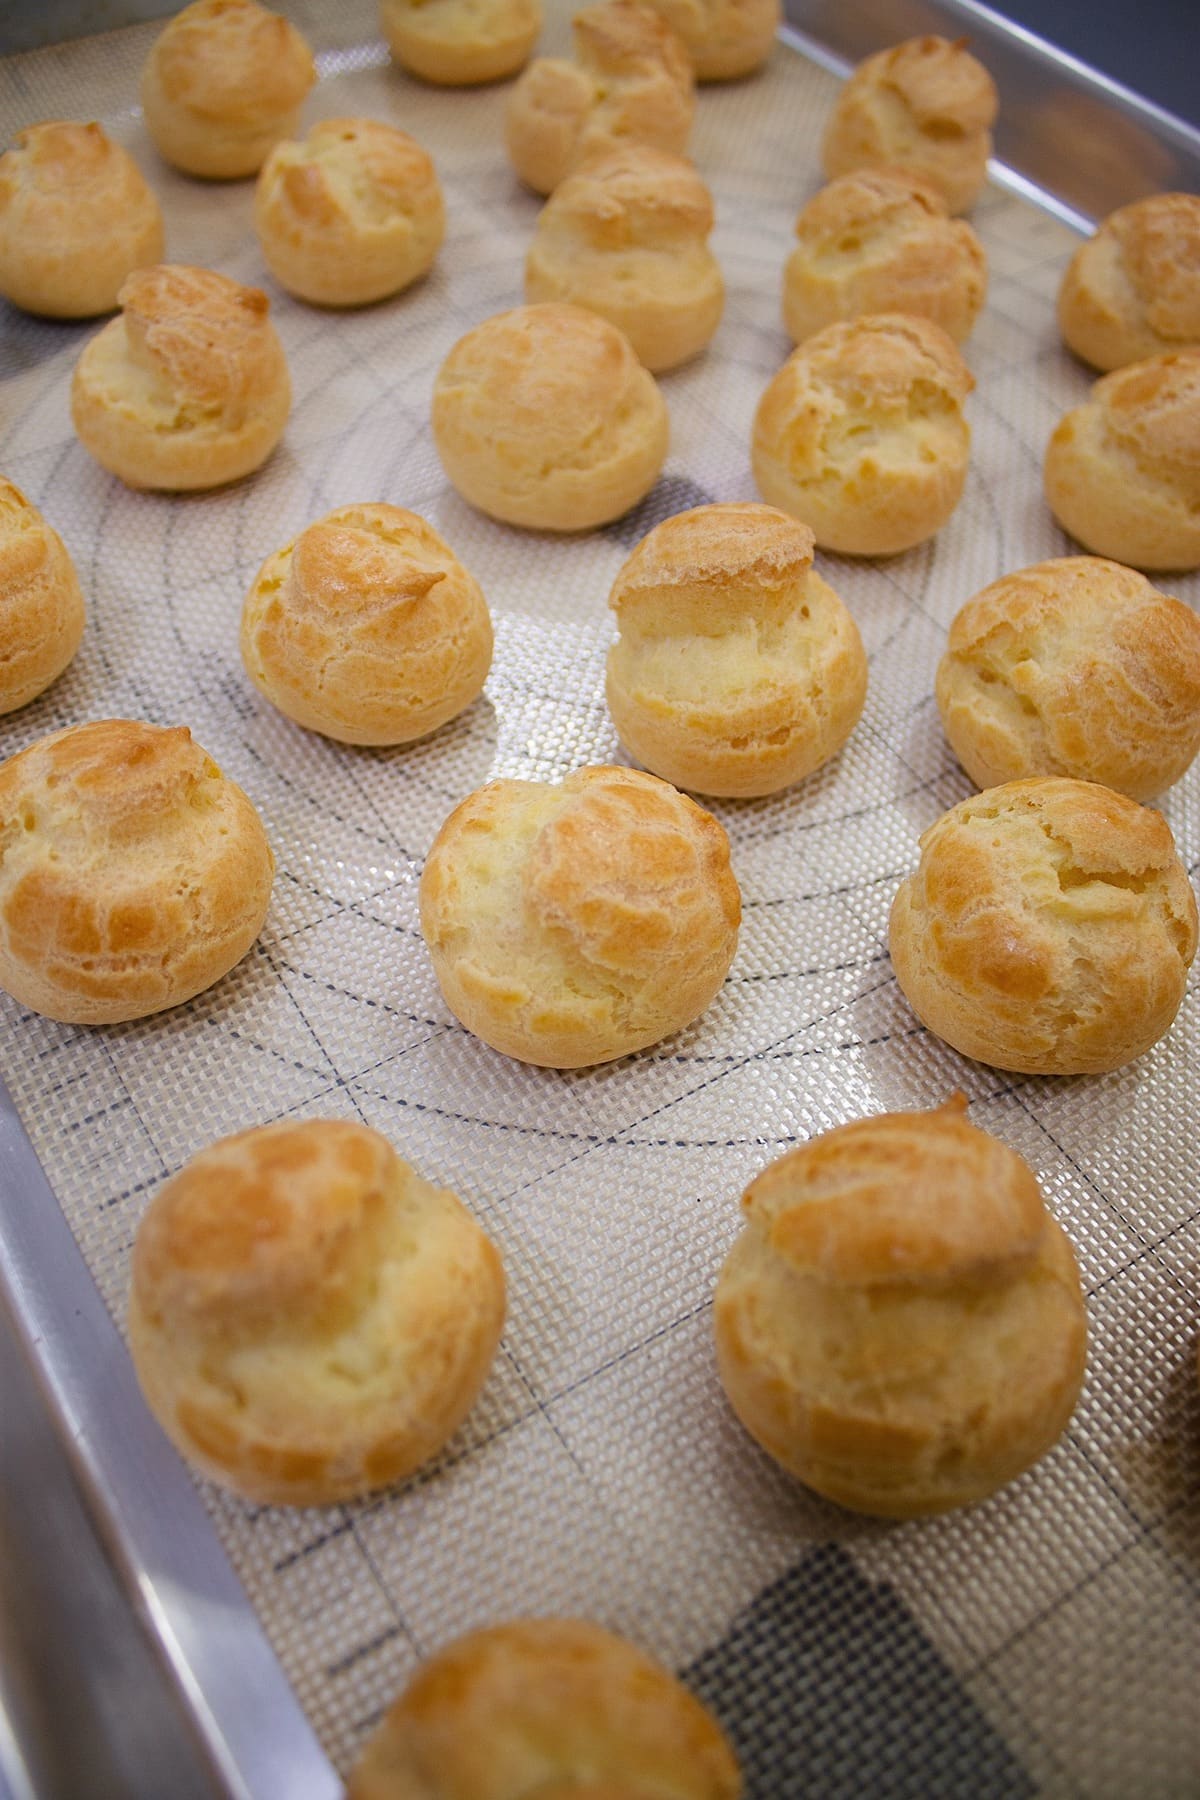 Baked cream puffs on a sheet tray